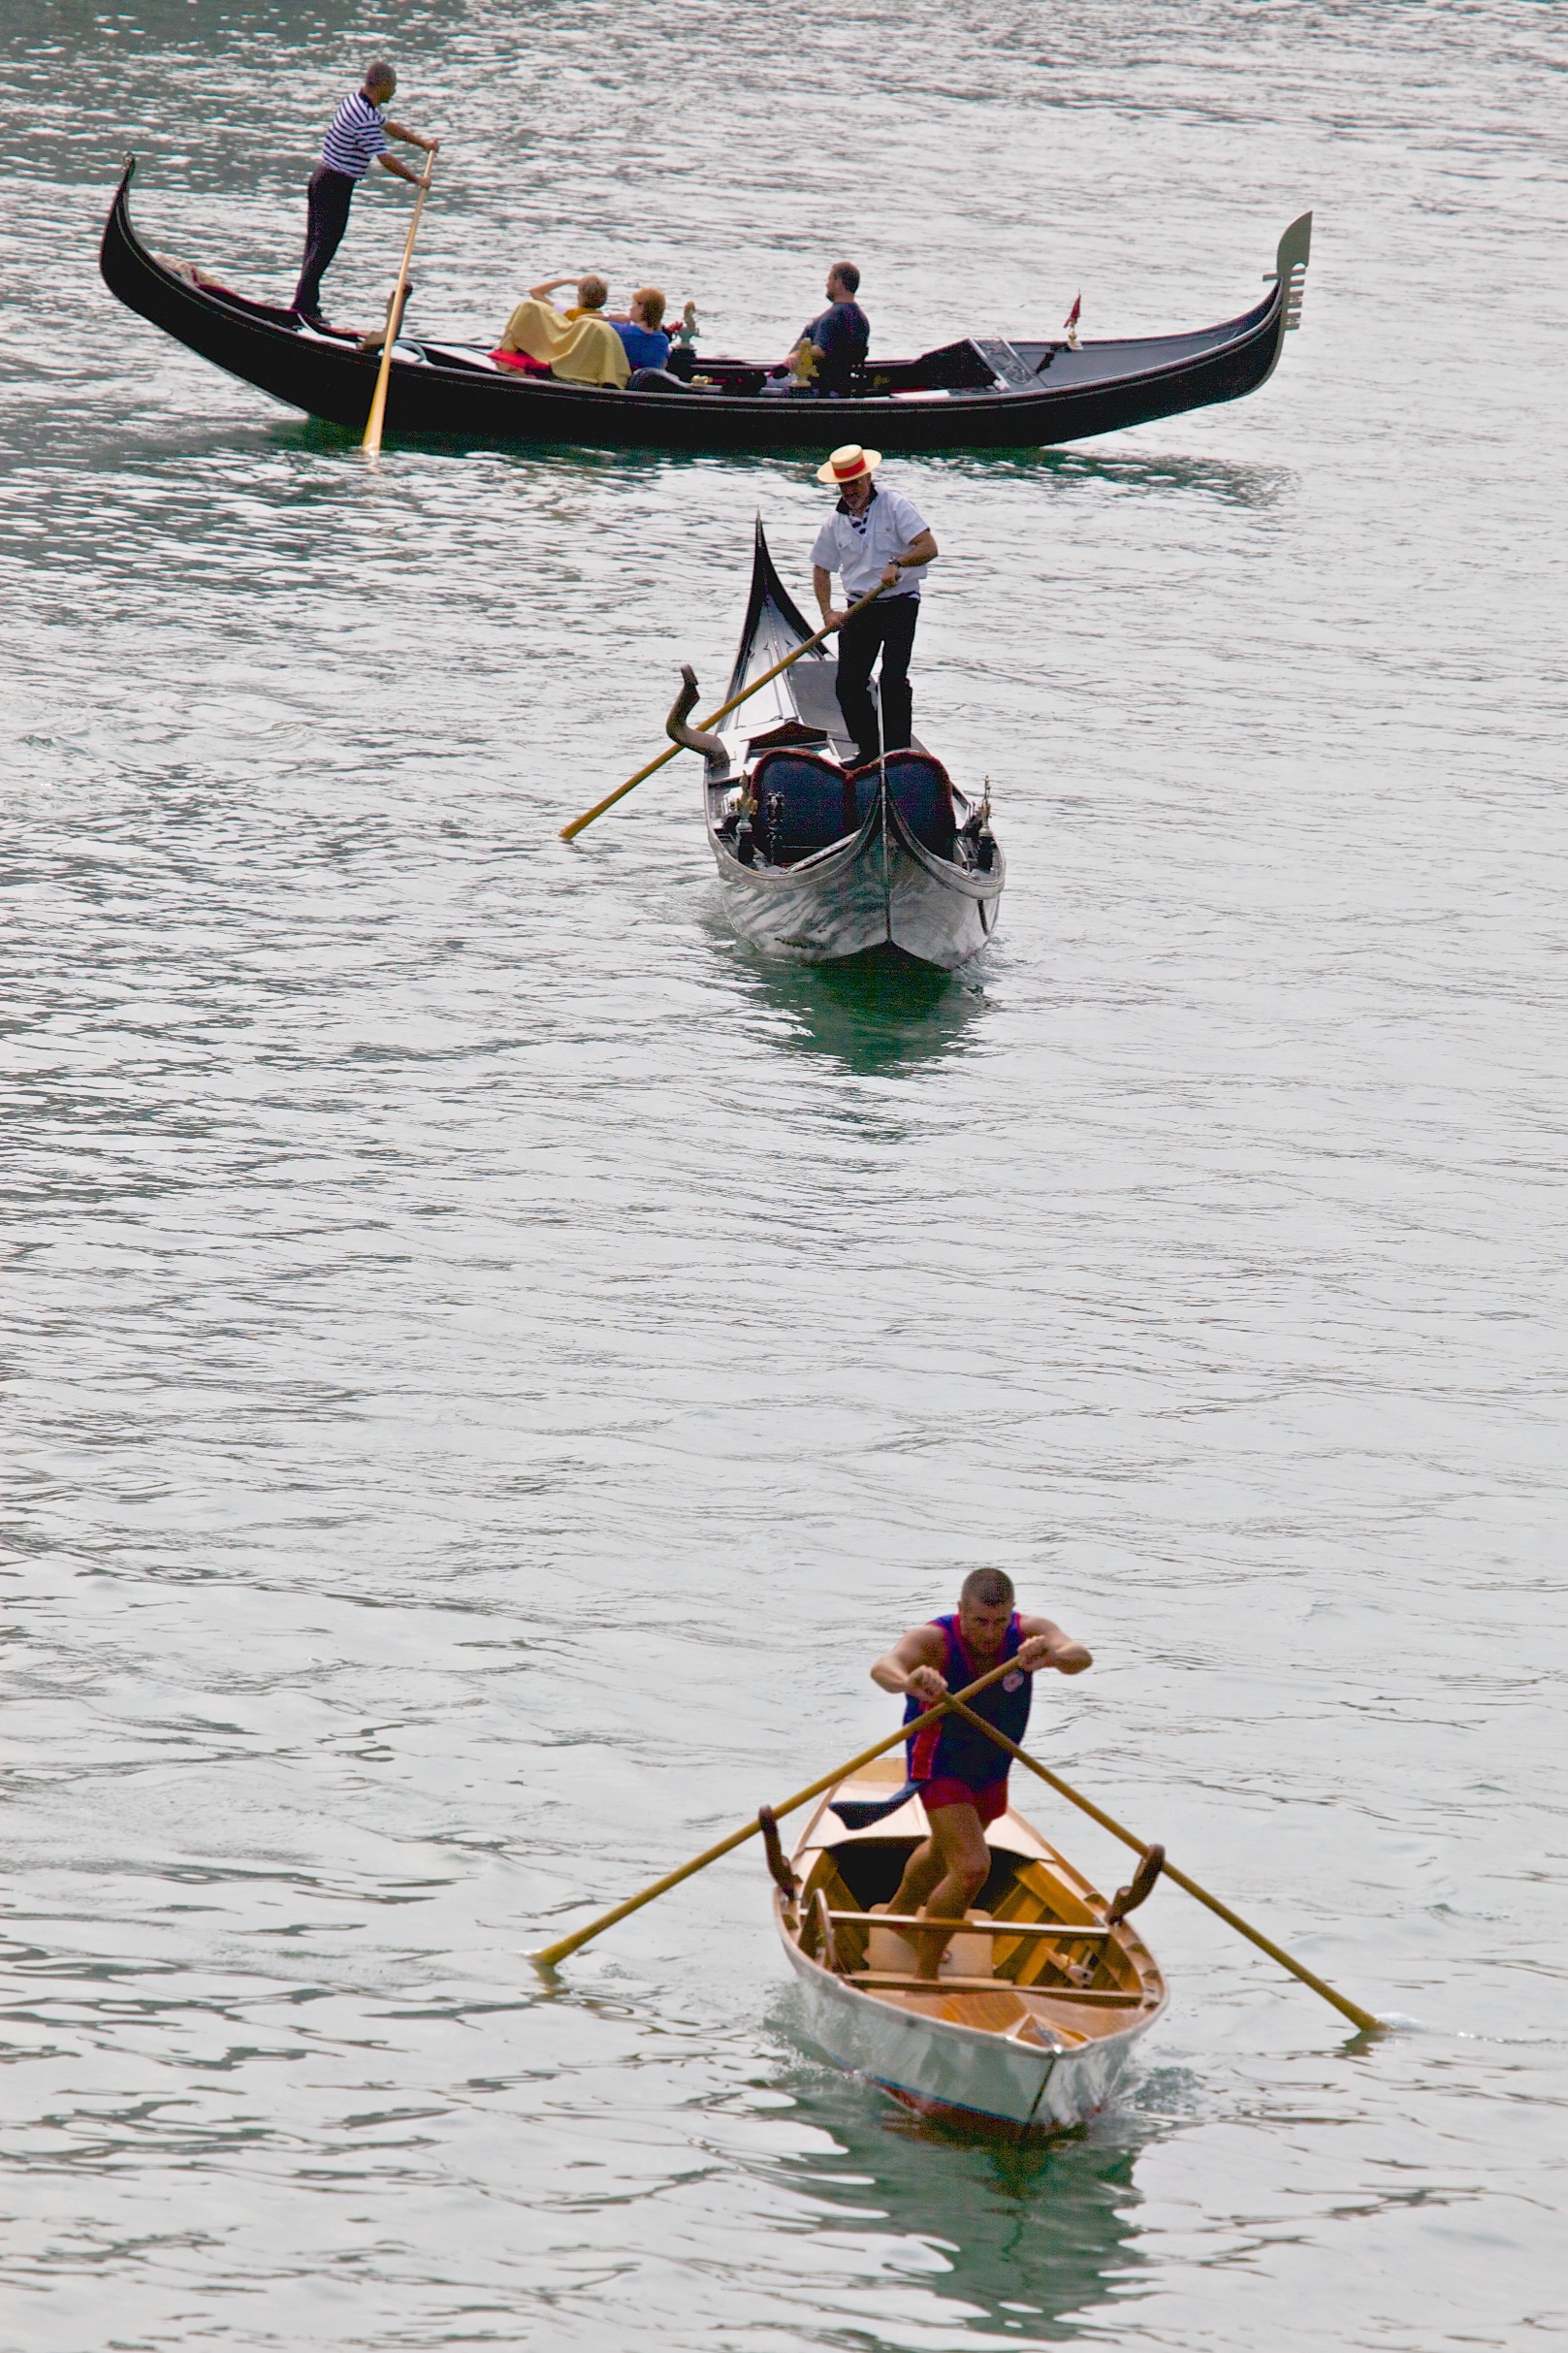 Different rowing techniques while crossing the Canale Grande in Venice.